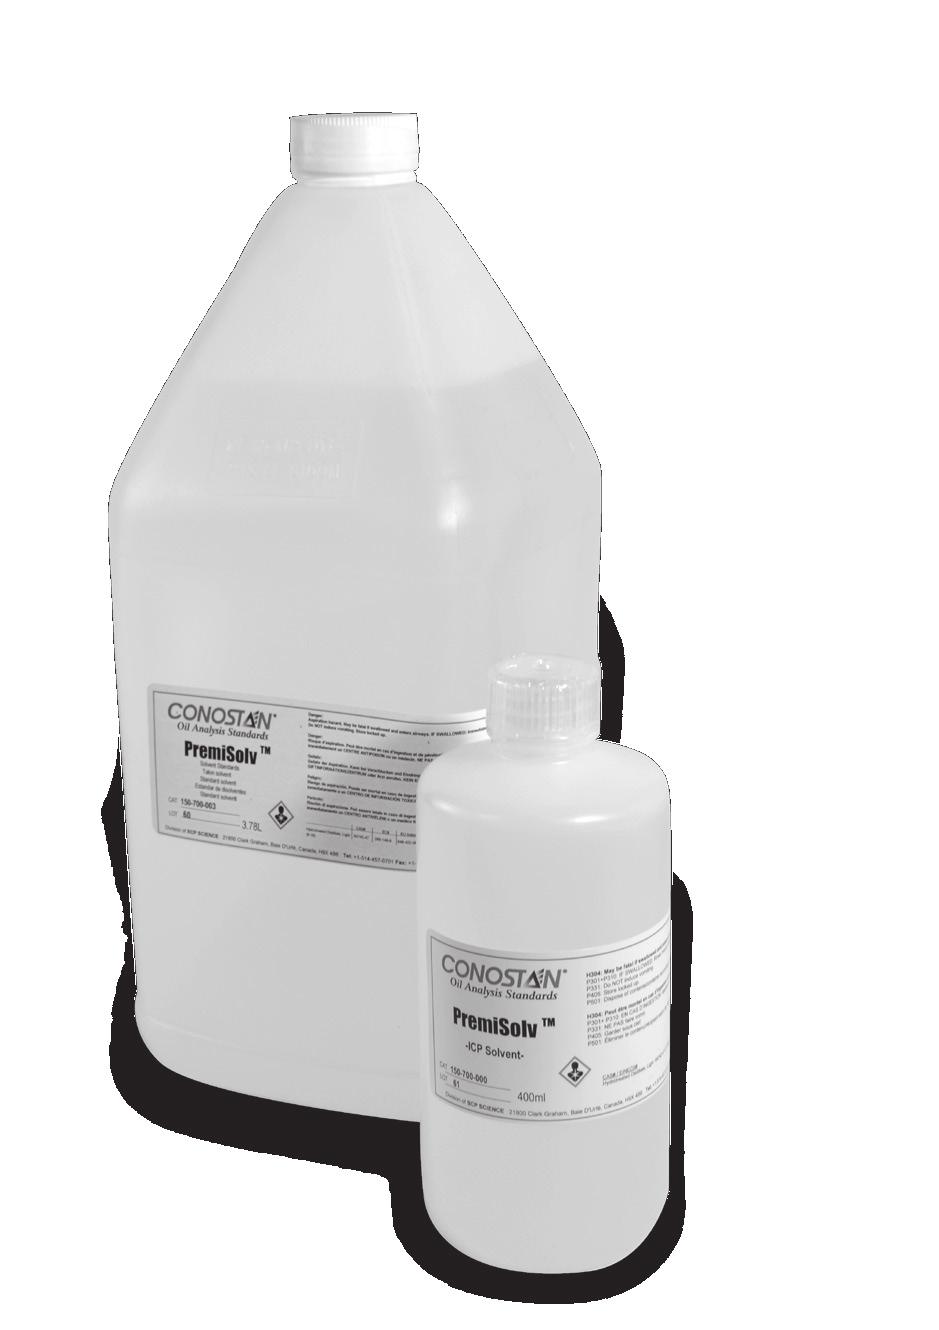 222 SCP SCIENCE metallo-organic standards blank oils, solvents, stabilizer and internal standards Internal Standards Internal Standards are often used in ICP-OES in order to compensate for, and